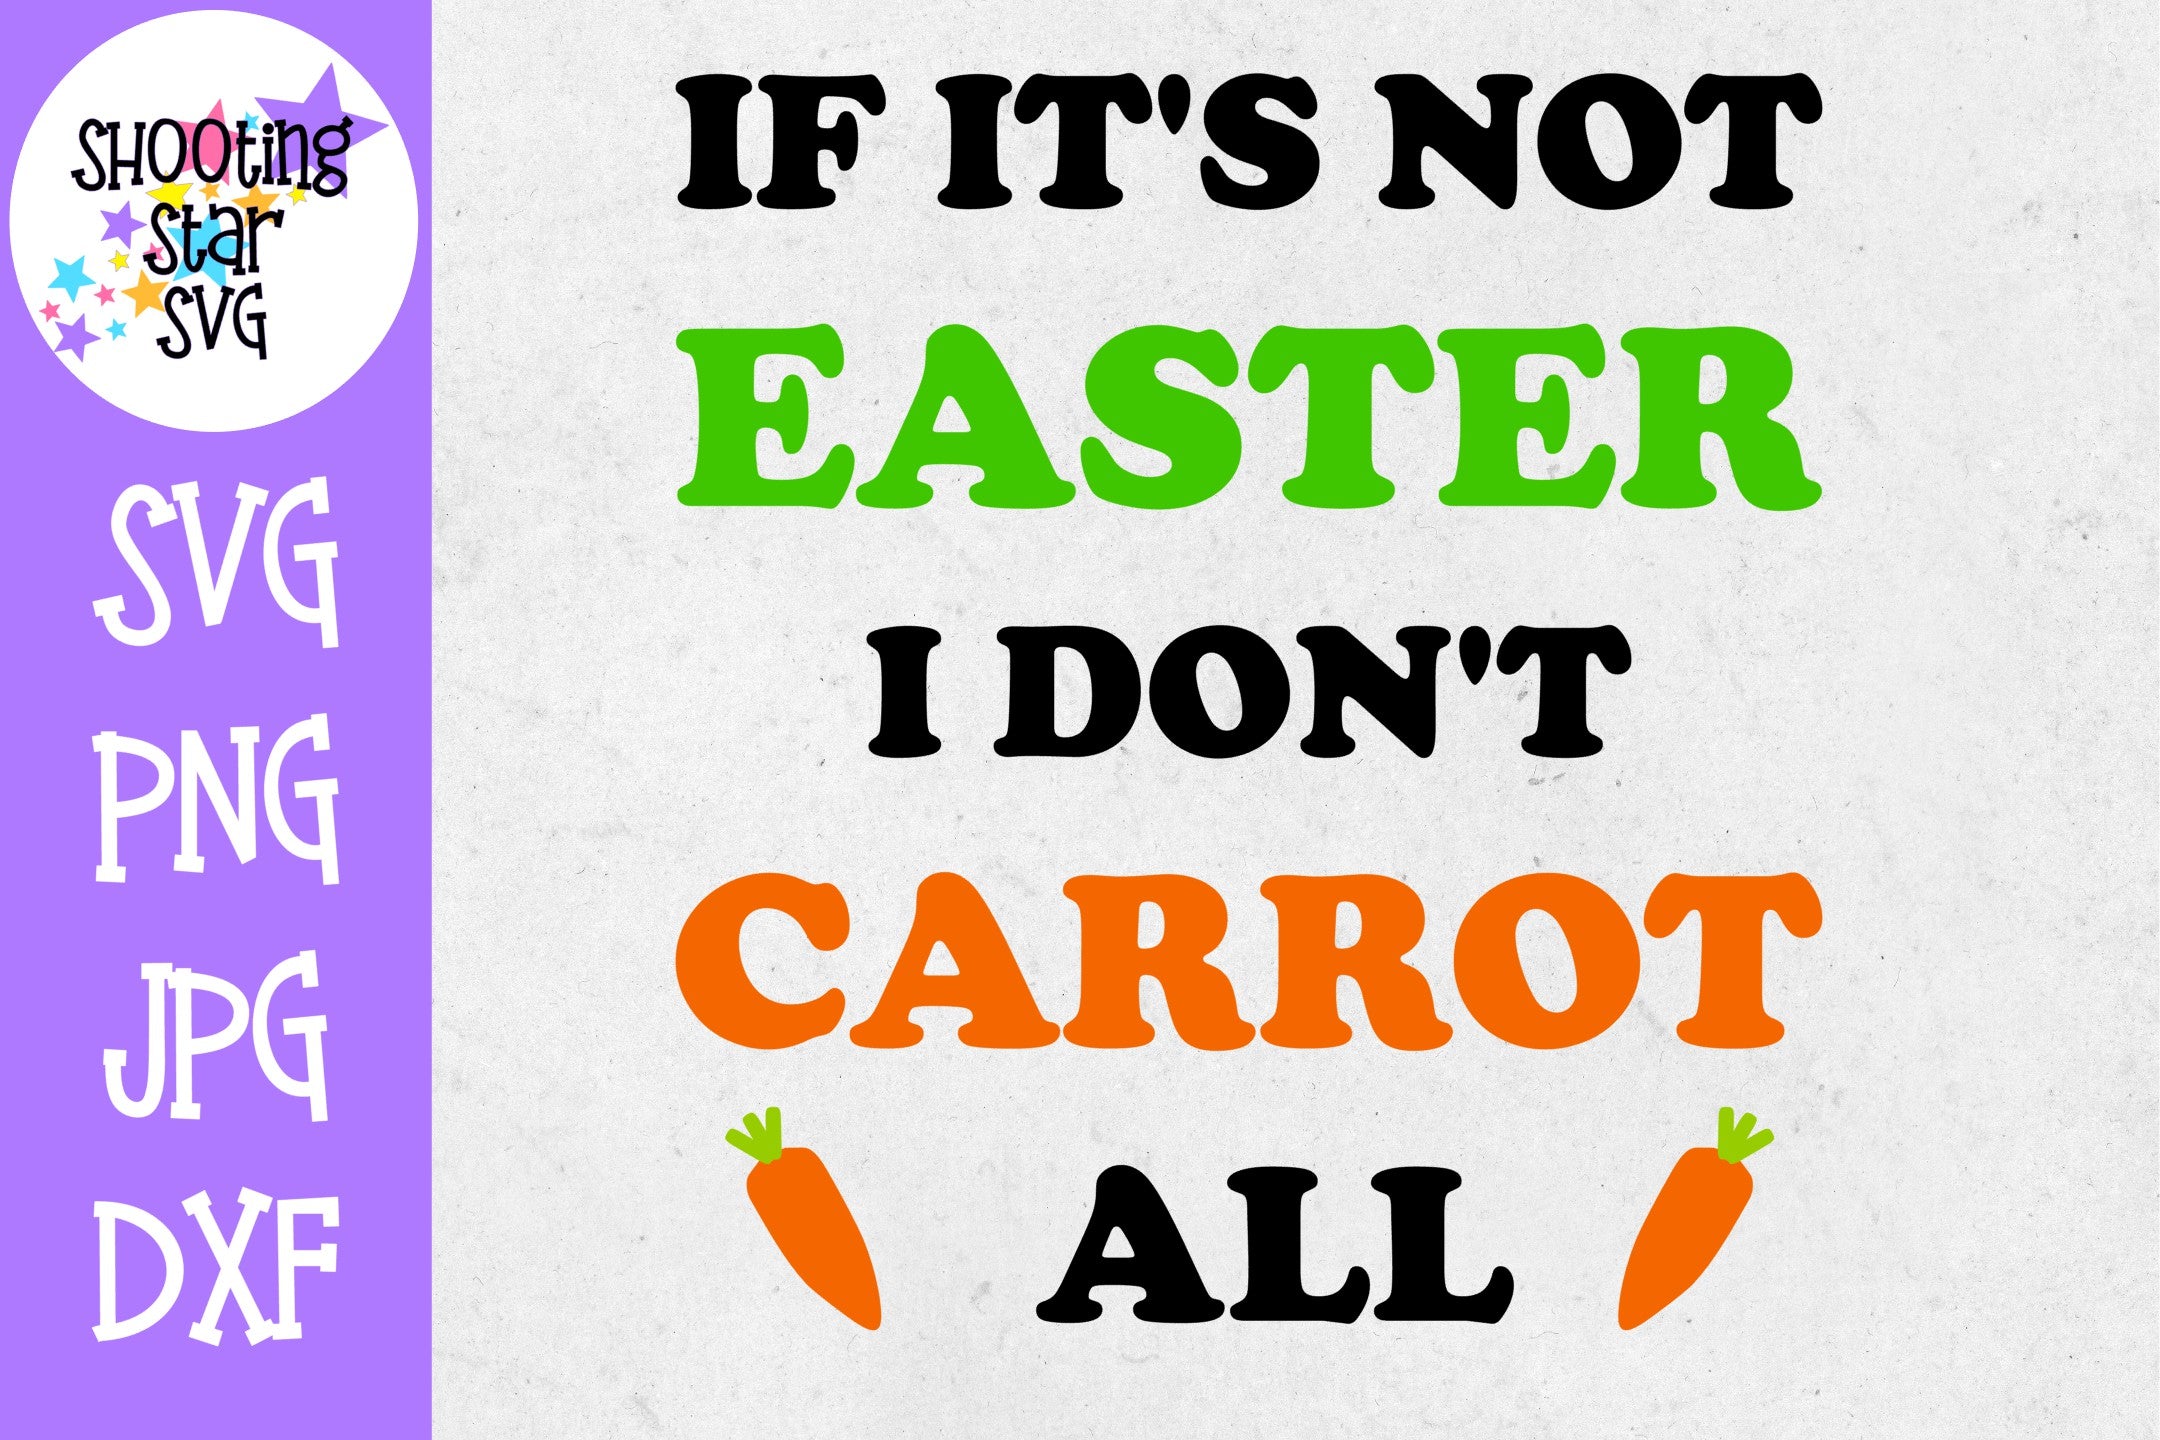 If it's not easter i don't carrot all - Easter SVG